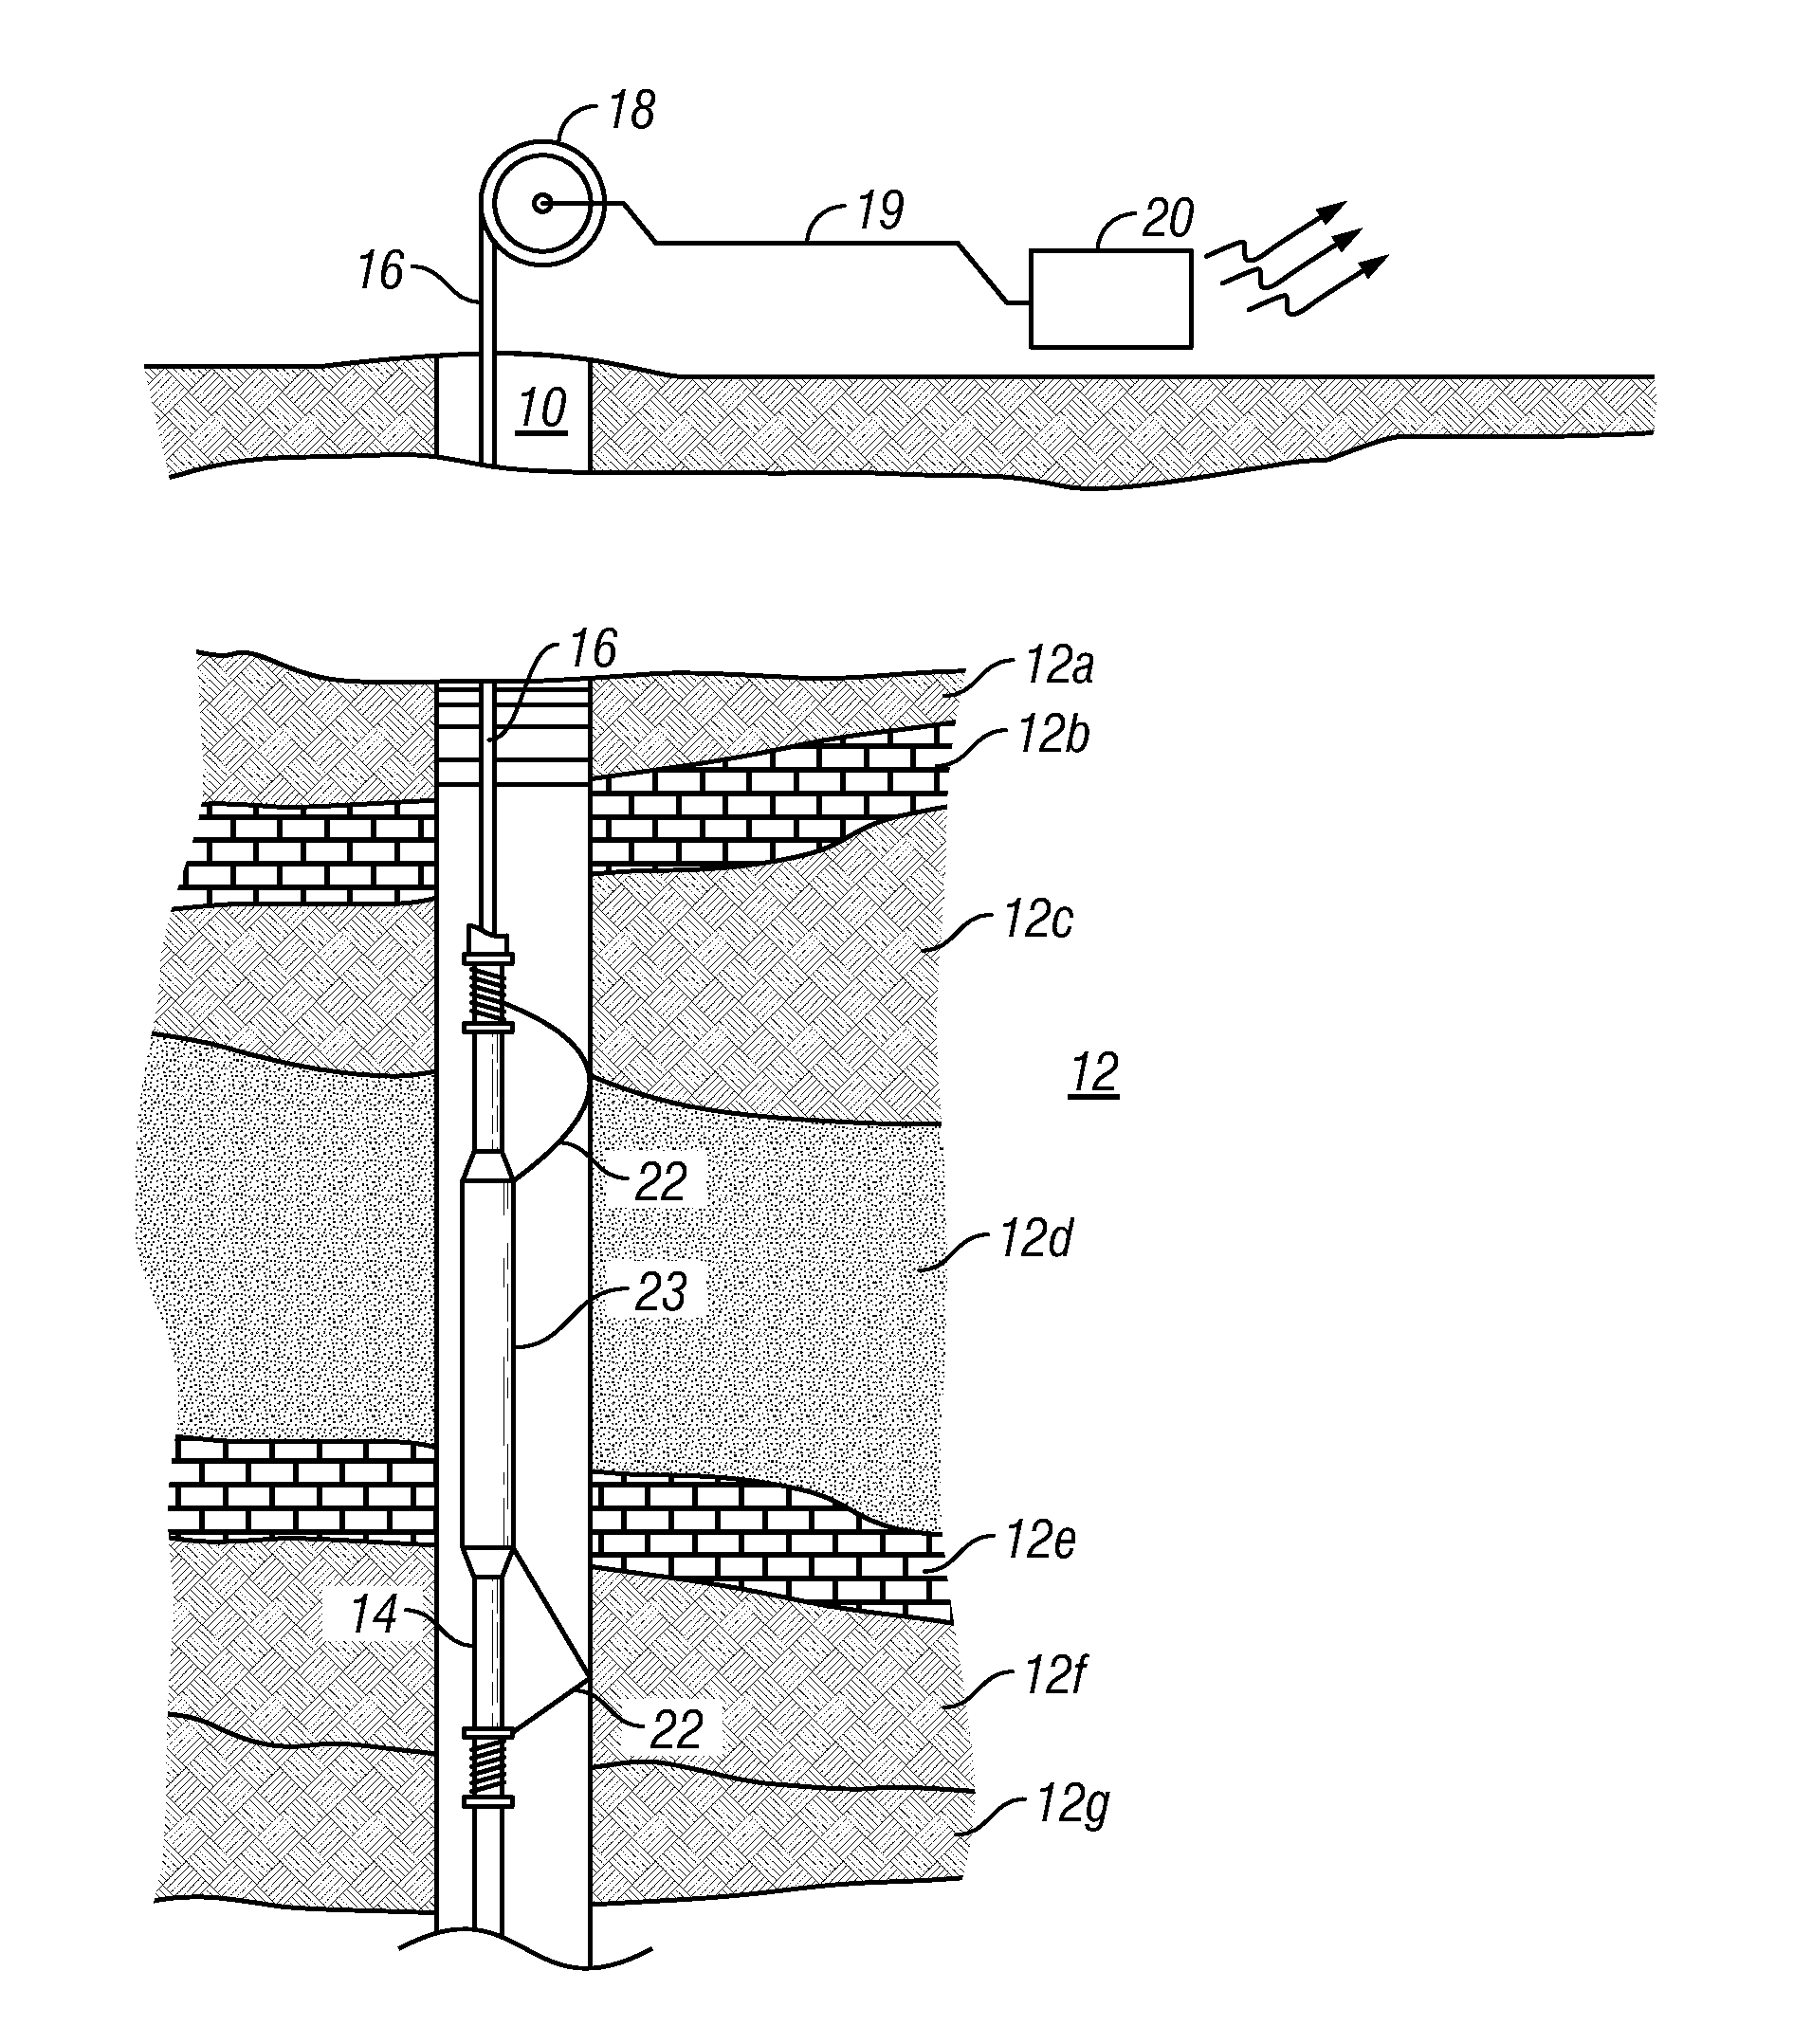 Method and Apparatus for Determining Multiscale Similarity Between NMR Measurements and a Reference Well Log